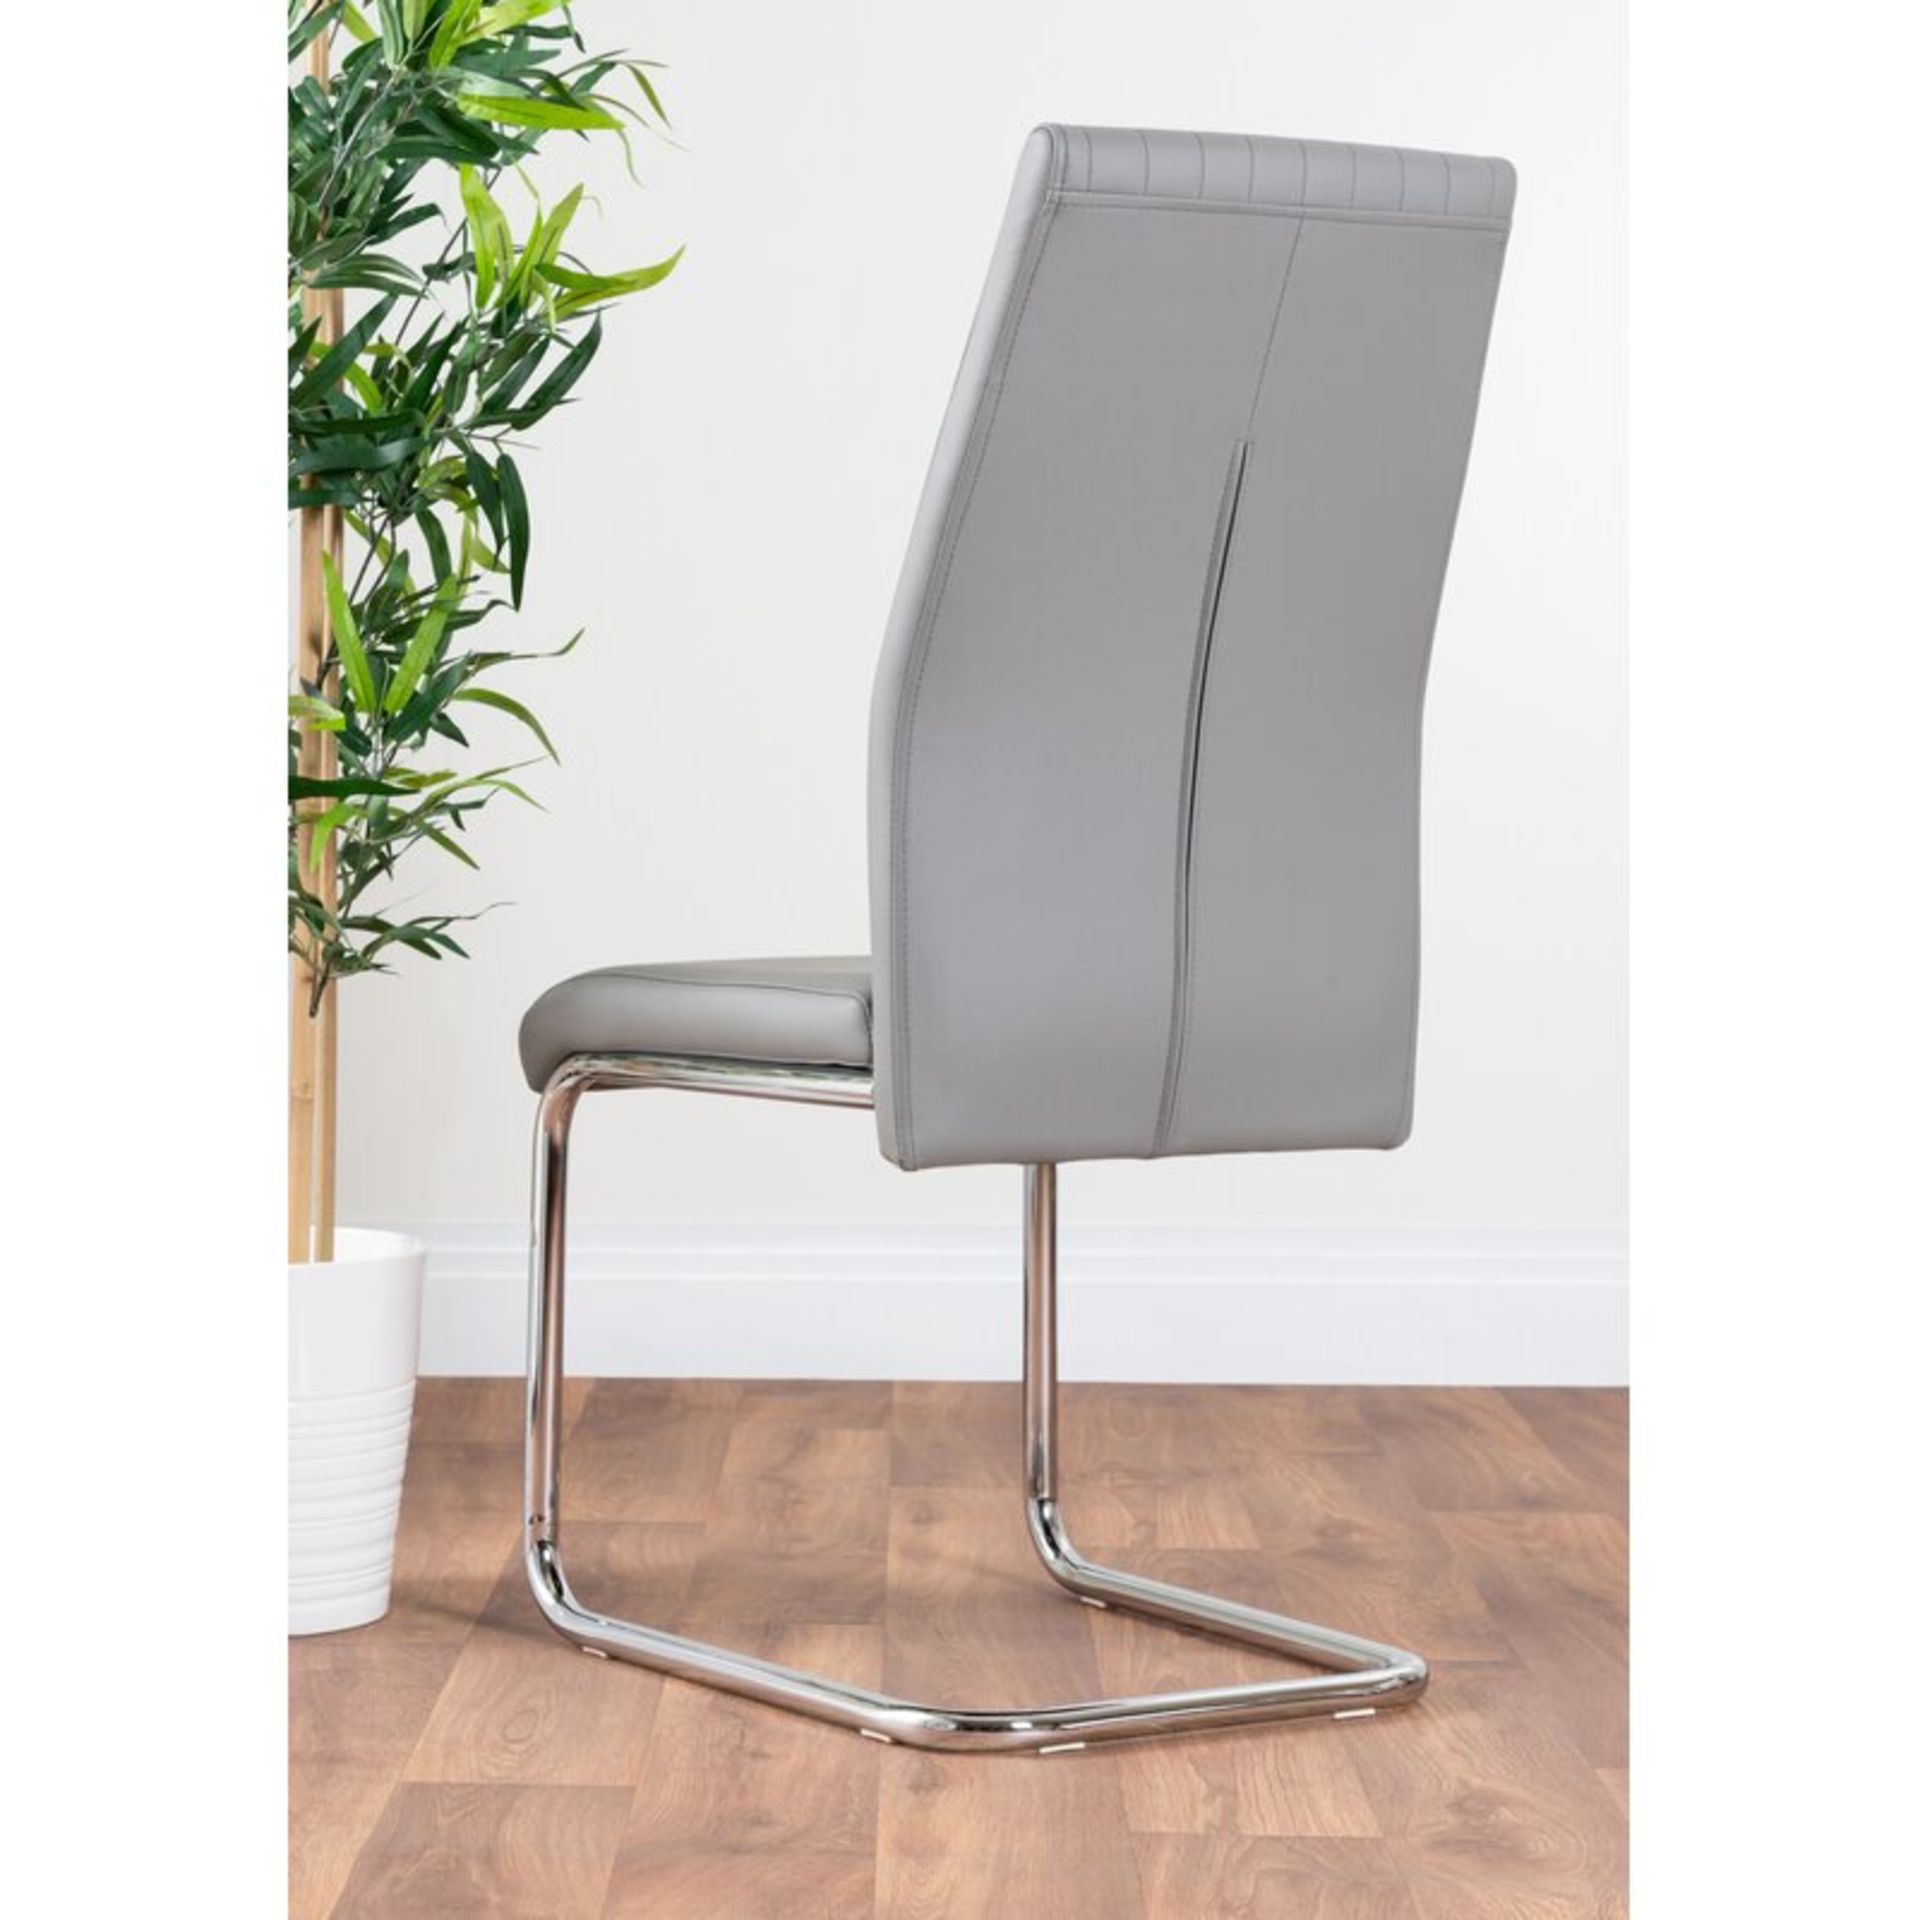 x2 Eubanks Upholstered Dining Chair RRP £179.99.